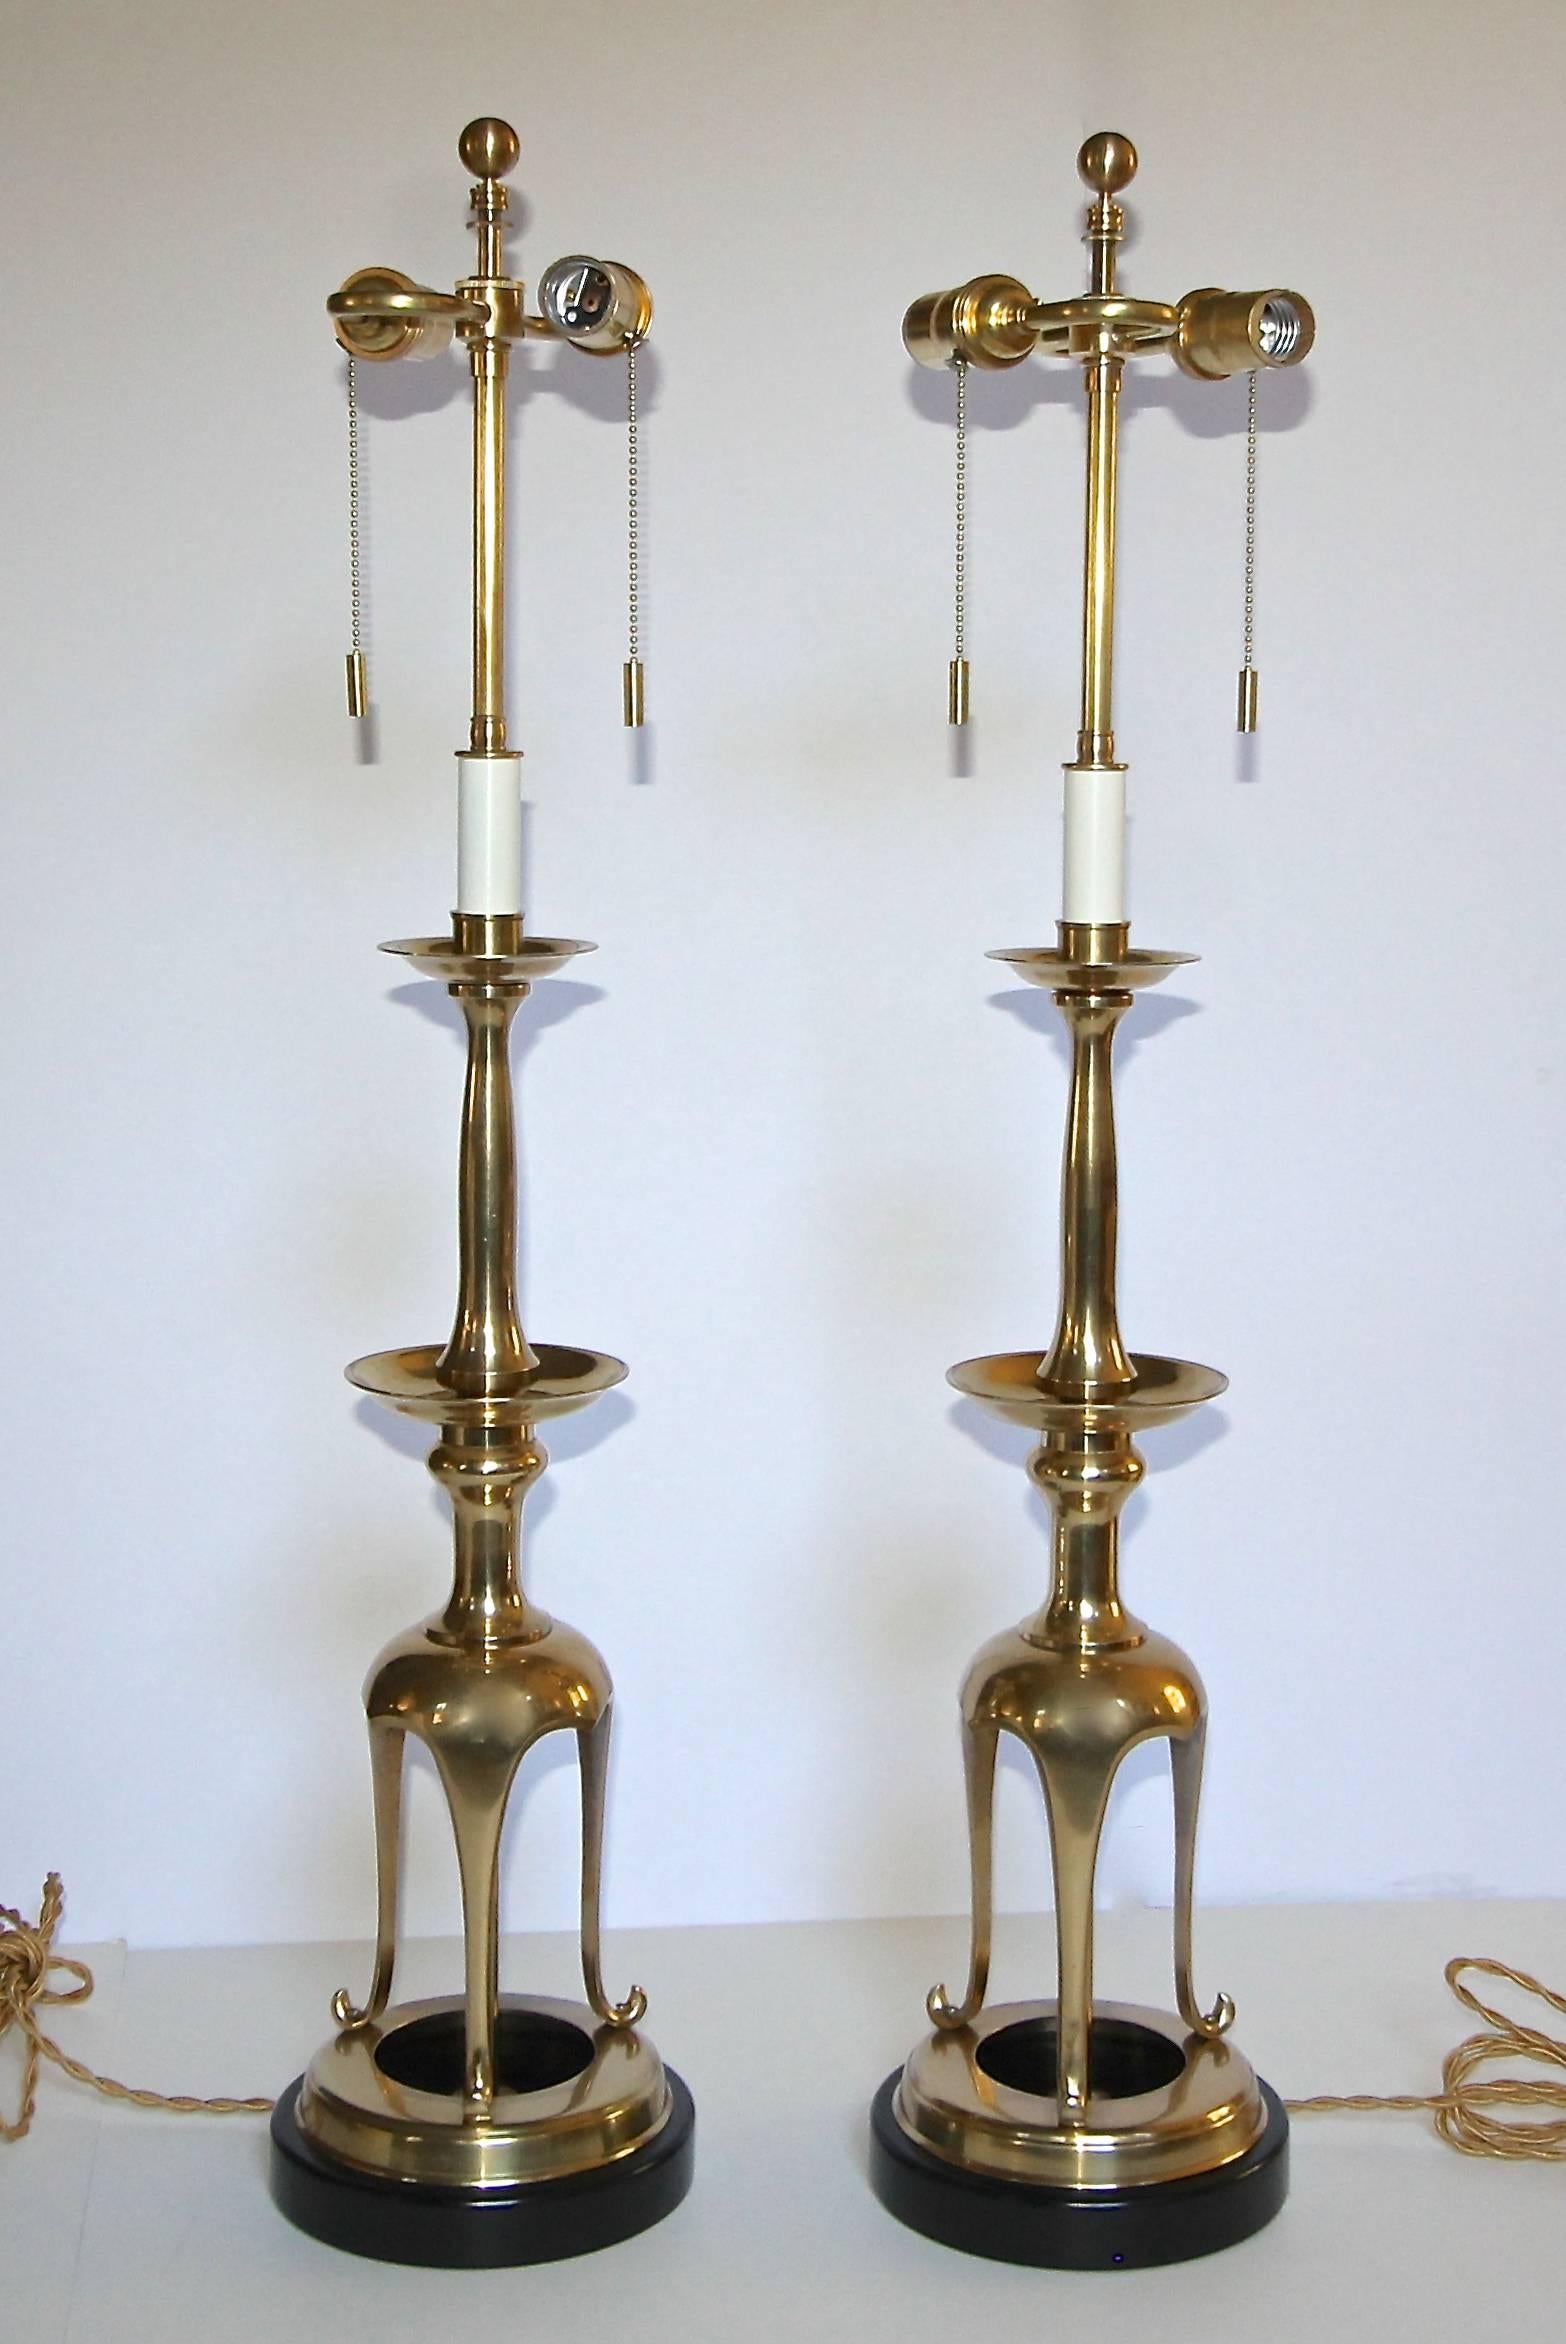 Pair of solid brass Asian Style candlesticks converted to table lamps resting on black painted wood bases. Newly wired for US with French style rayon covered cords and brass double cluster sockets. Shades not included for photography only.